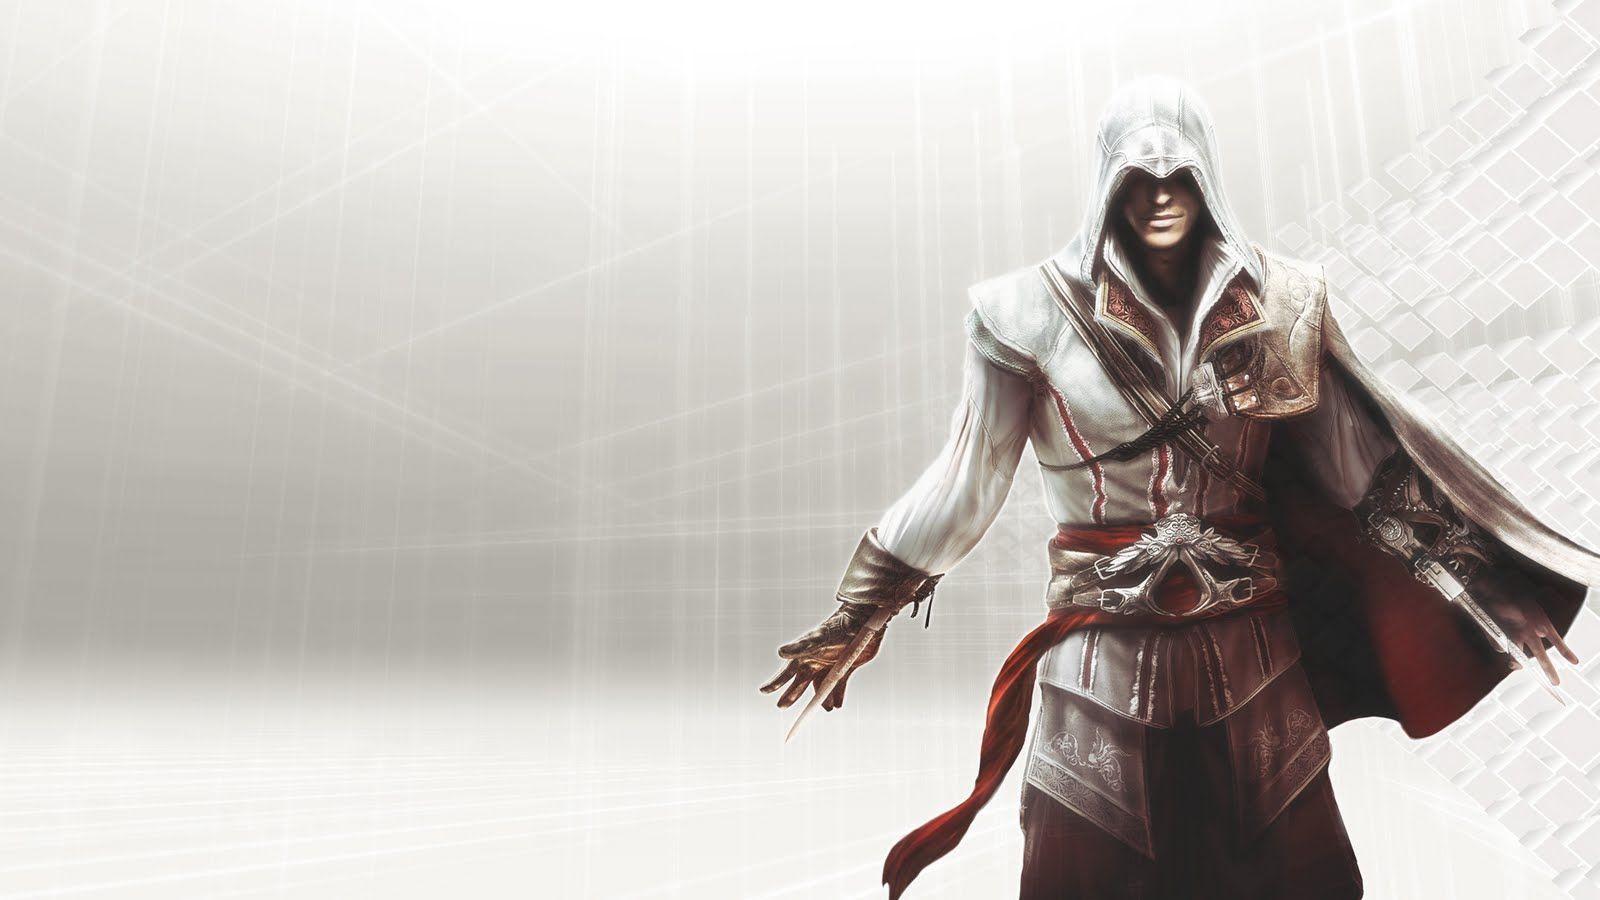 Assassin&;s creed 2 wallpaper 1080p. Funny & Amazing Image